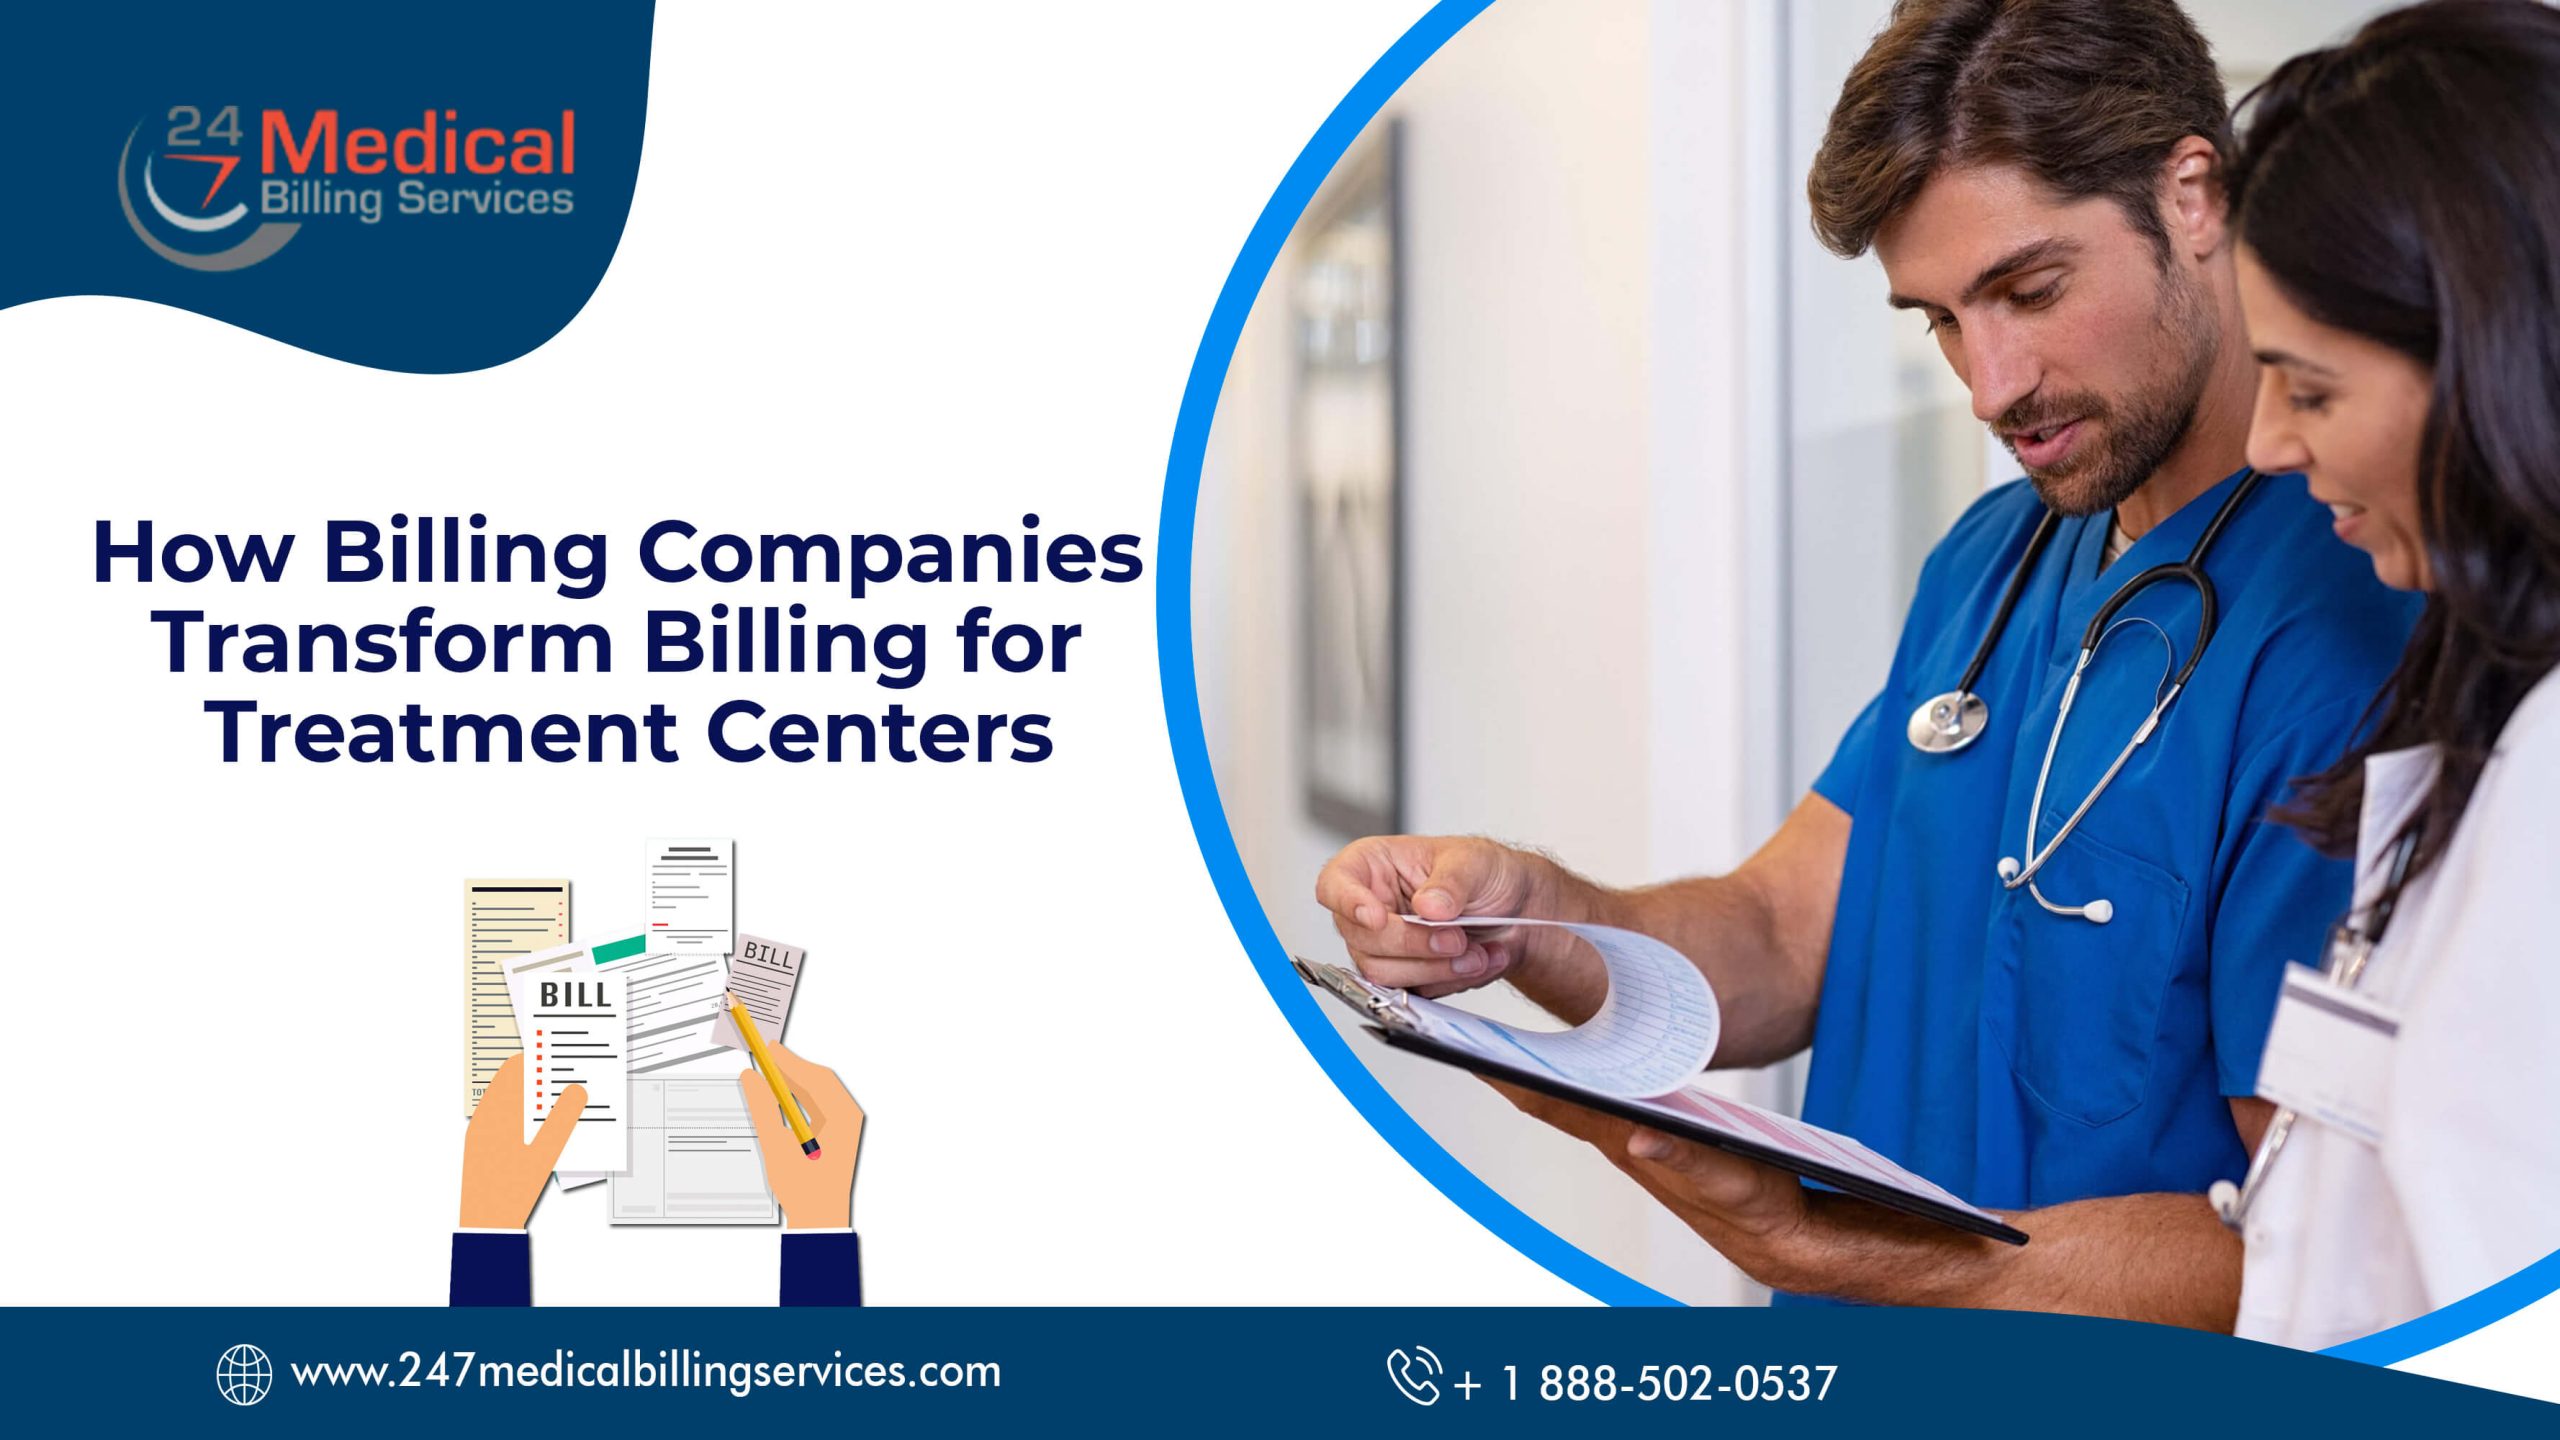  How Billing Companies Transform Billing for Treatment Centers